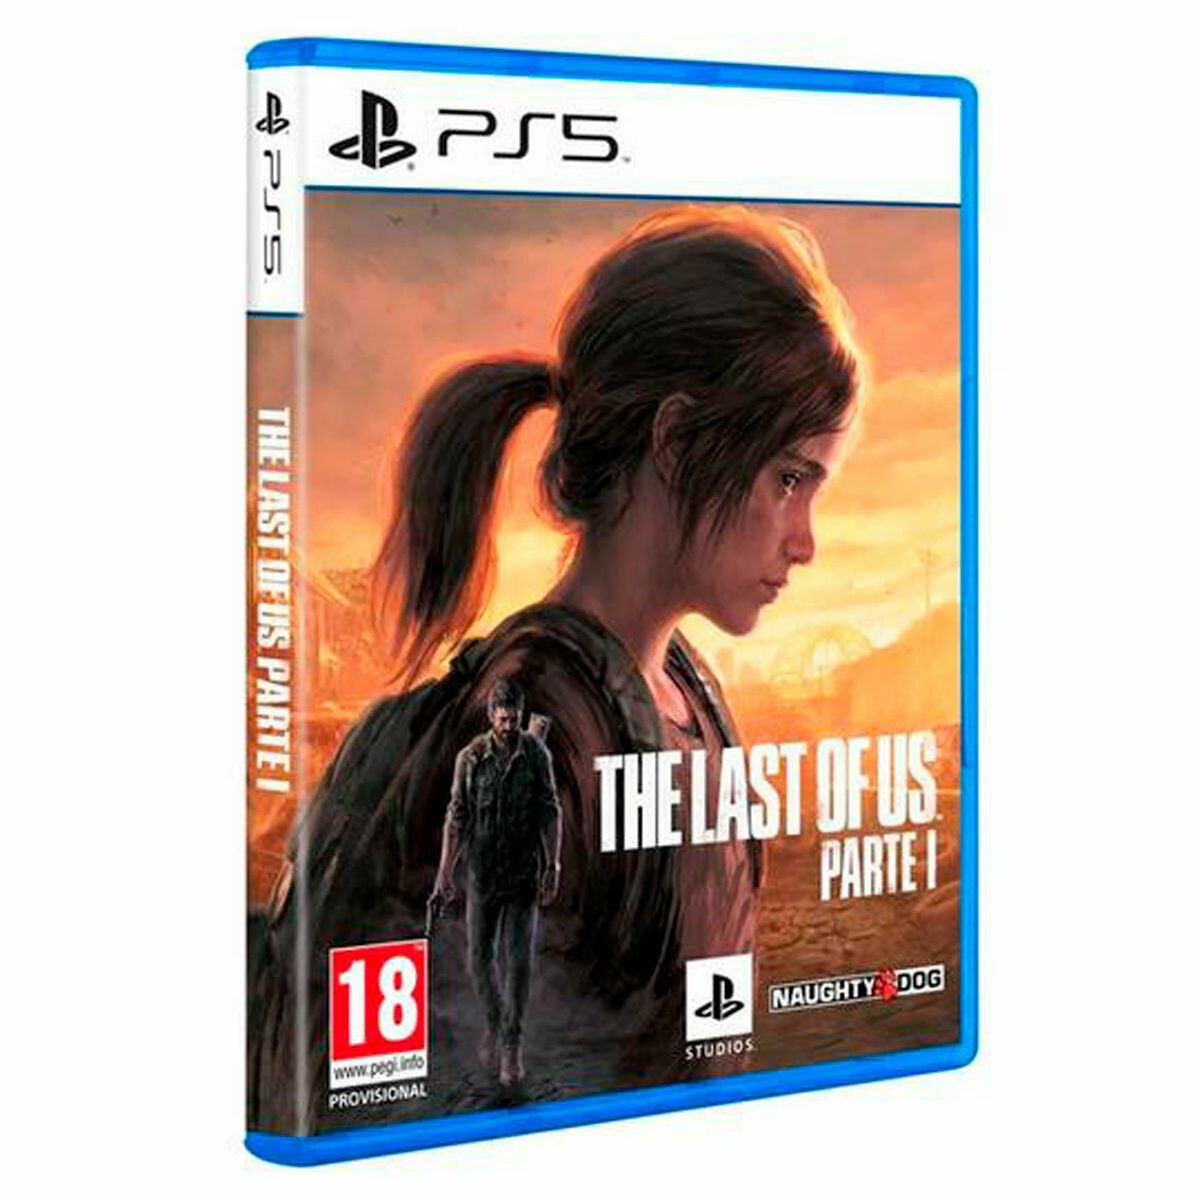 Gra wideo na PlayStation 5 naughtydog THE LAST OF US PART 1